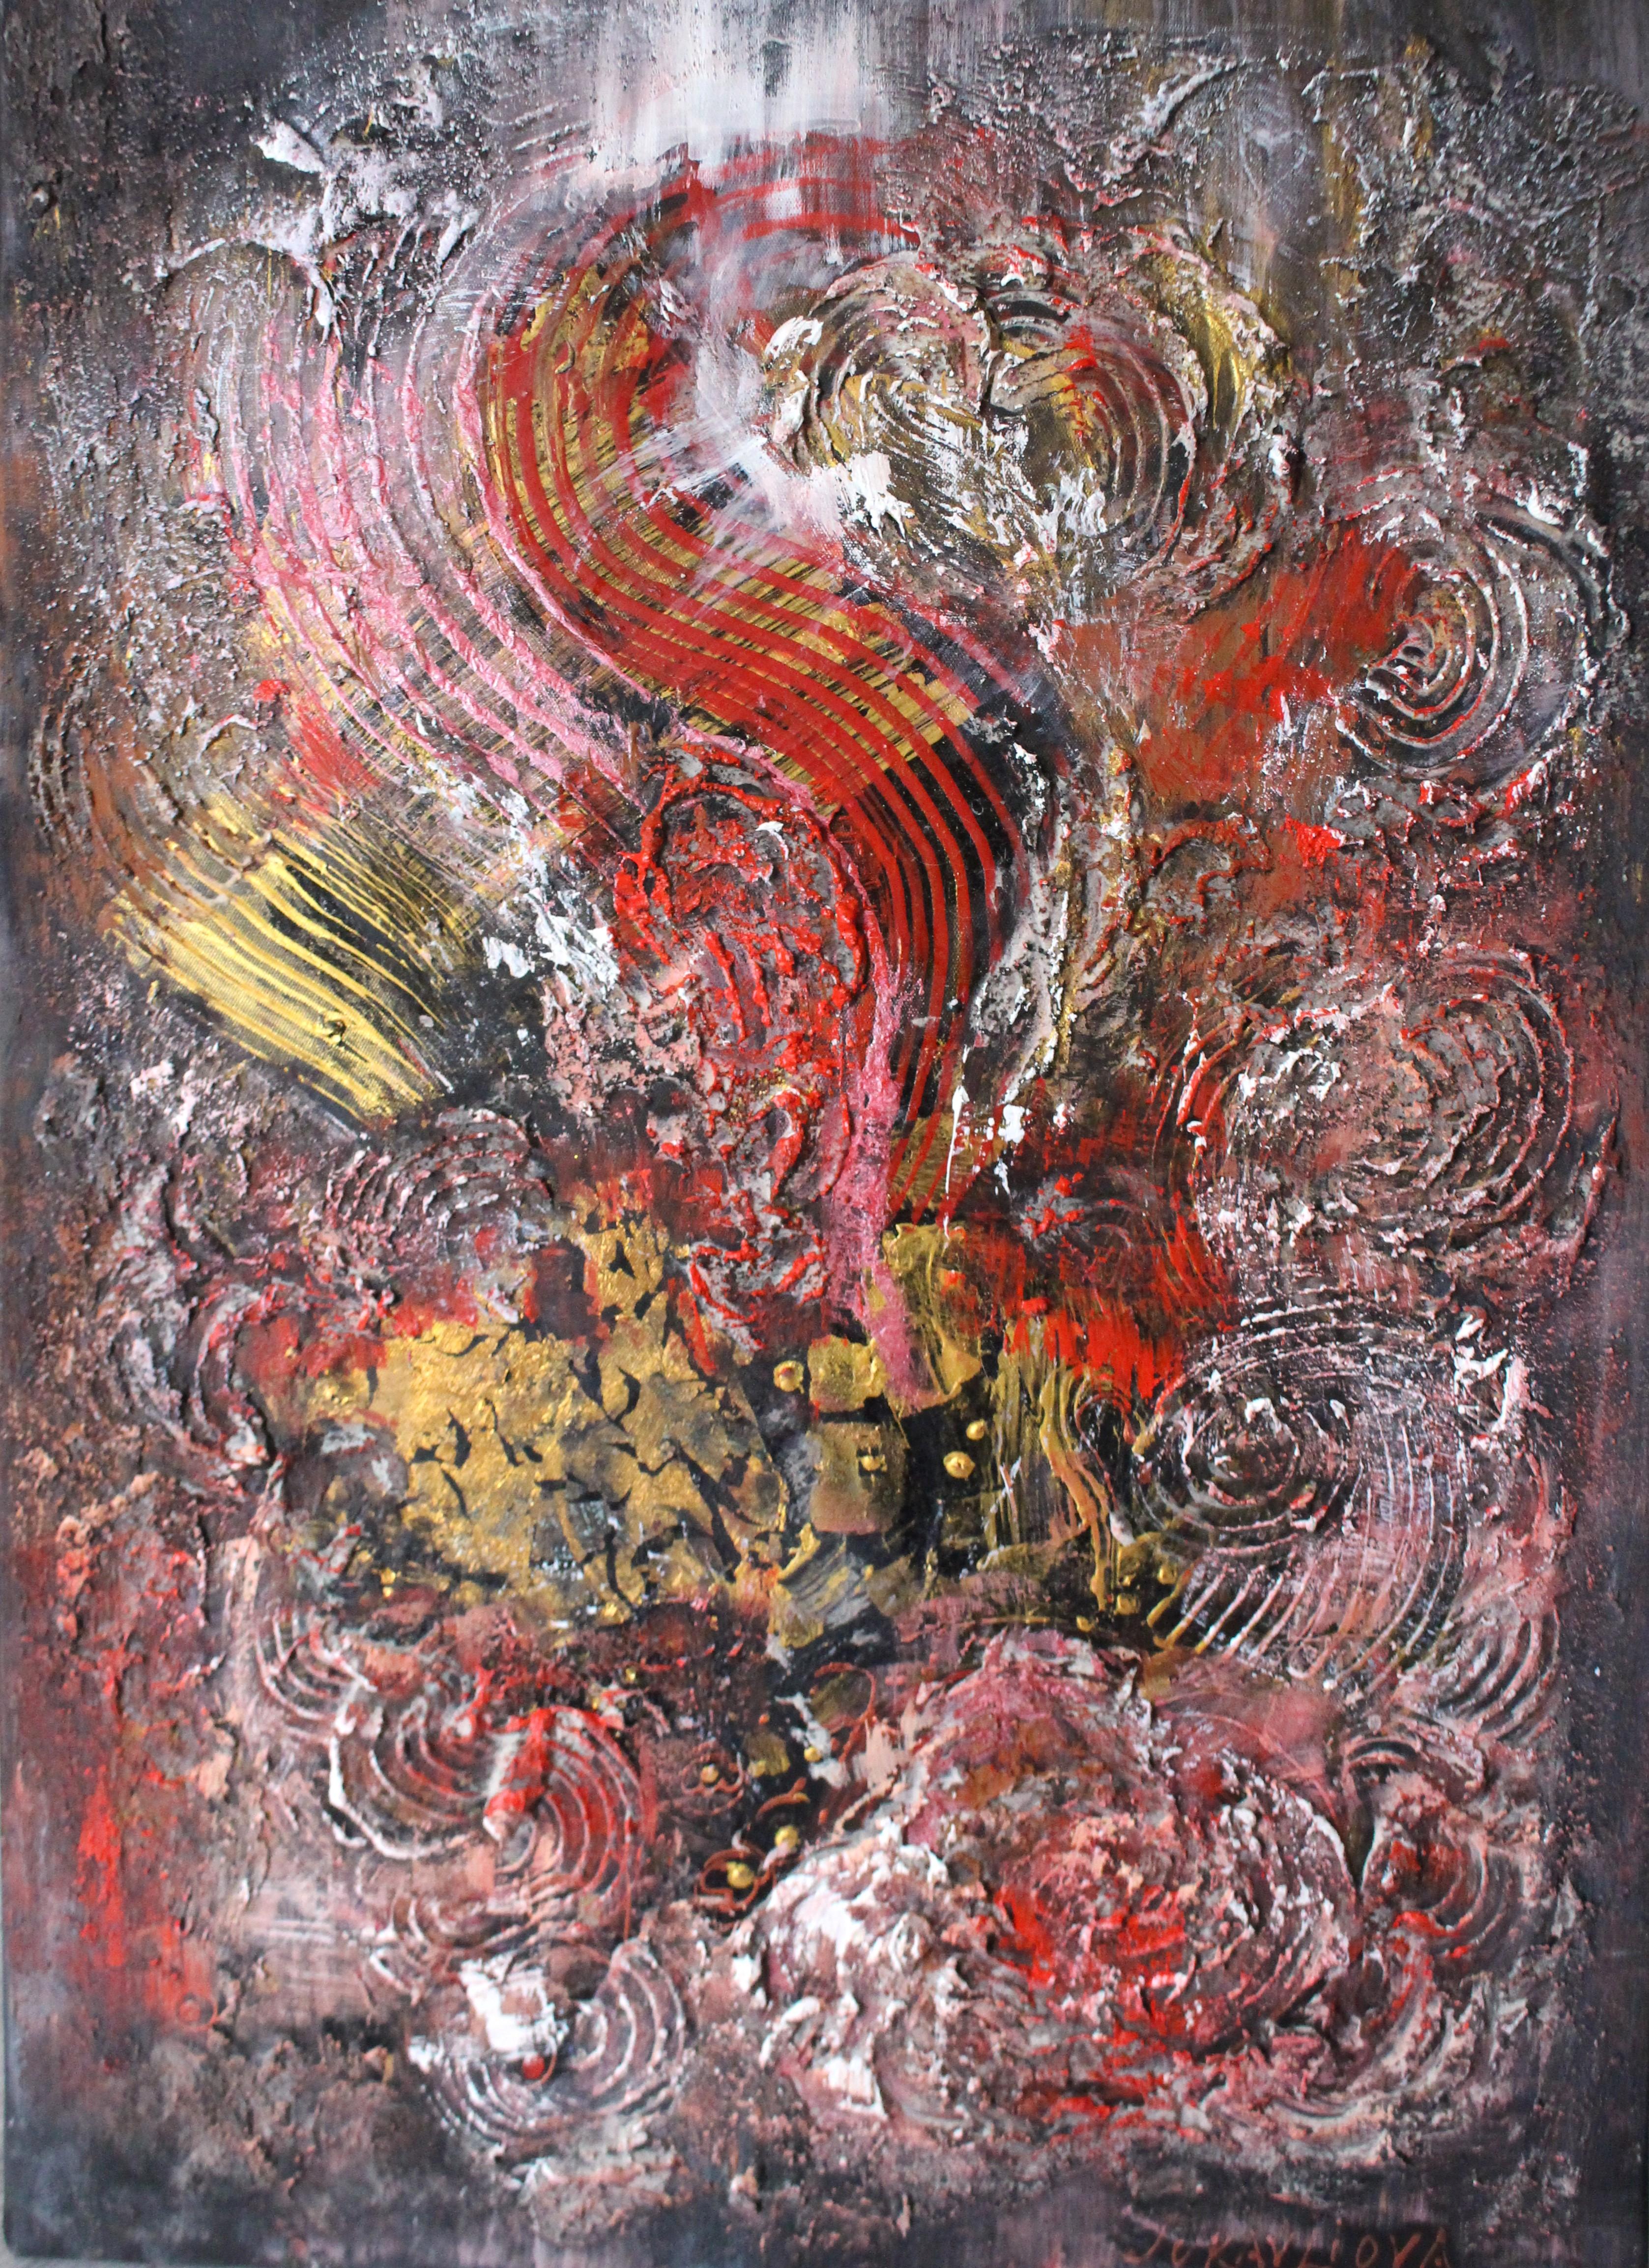 French Contemporary Art by Liubov Juravliova - Abstrait Rouge et Doré - Painting by Christiane Hess 